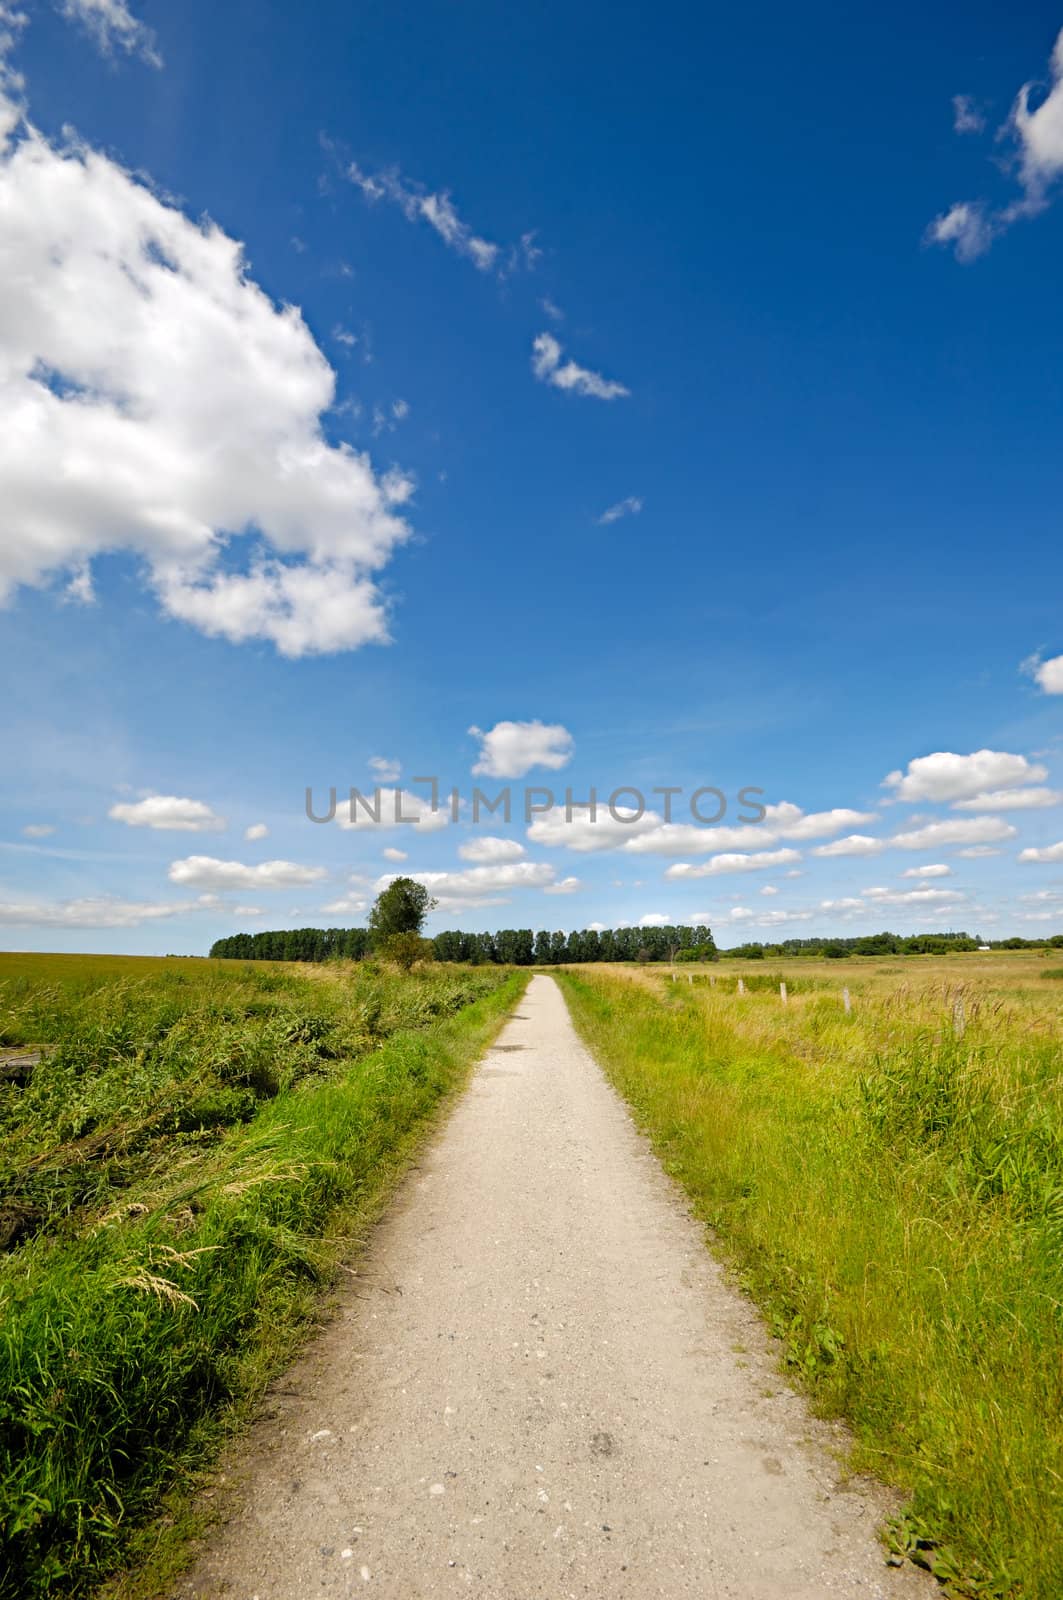 A small road and green nature with blue and cloudy sky.